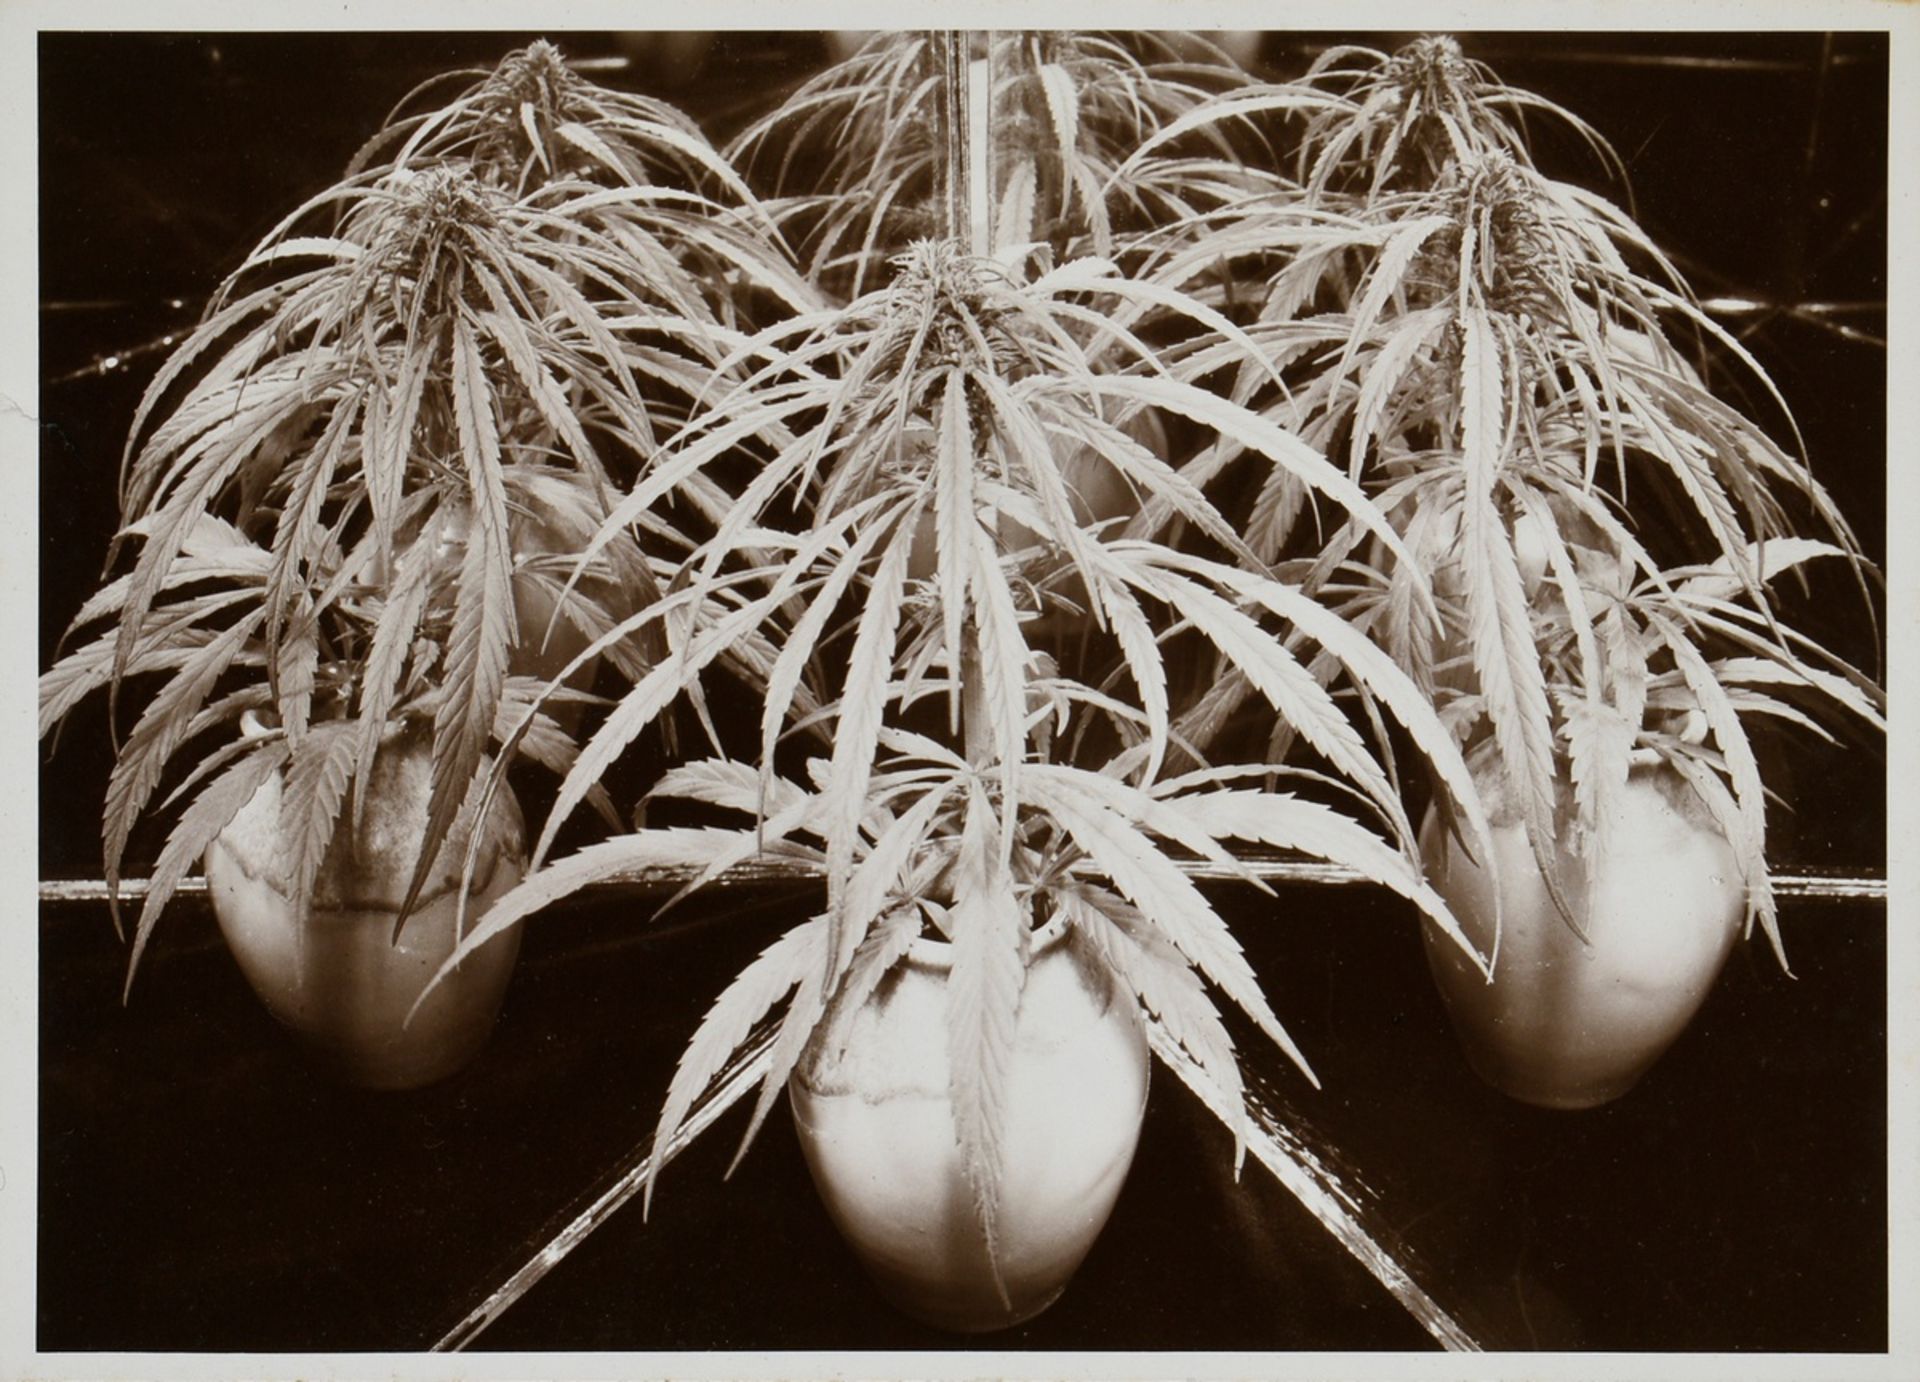 2 Koch, Fred (1904-1947) "Photographer" and "Hemp", photographs, 1x mounted on cardboard, stamped o - Image 5 of 5